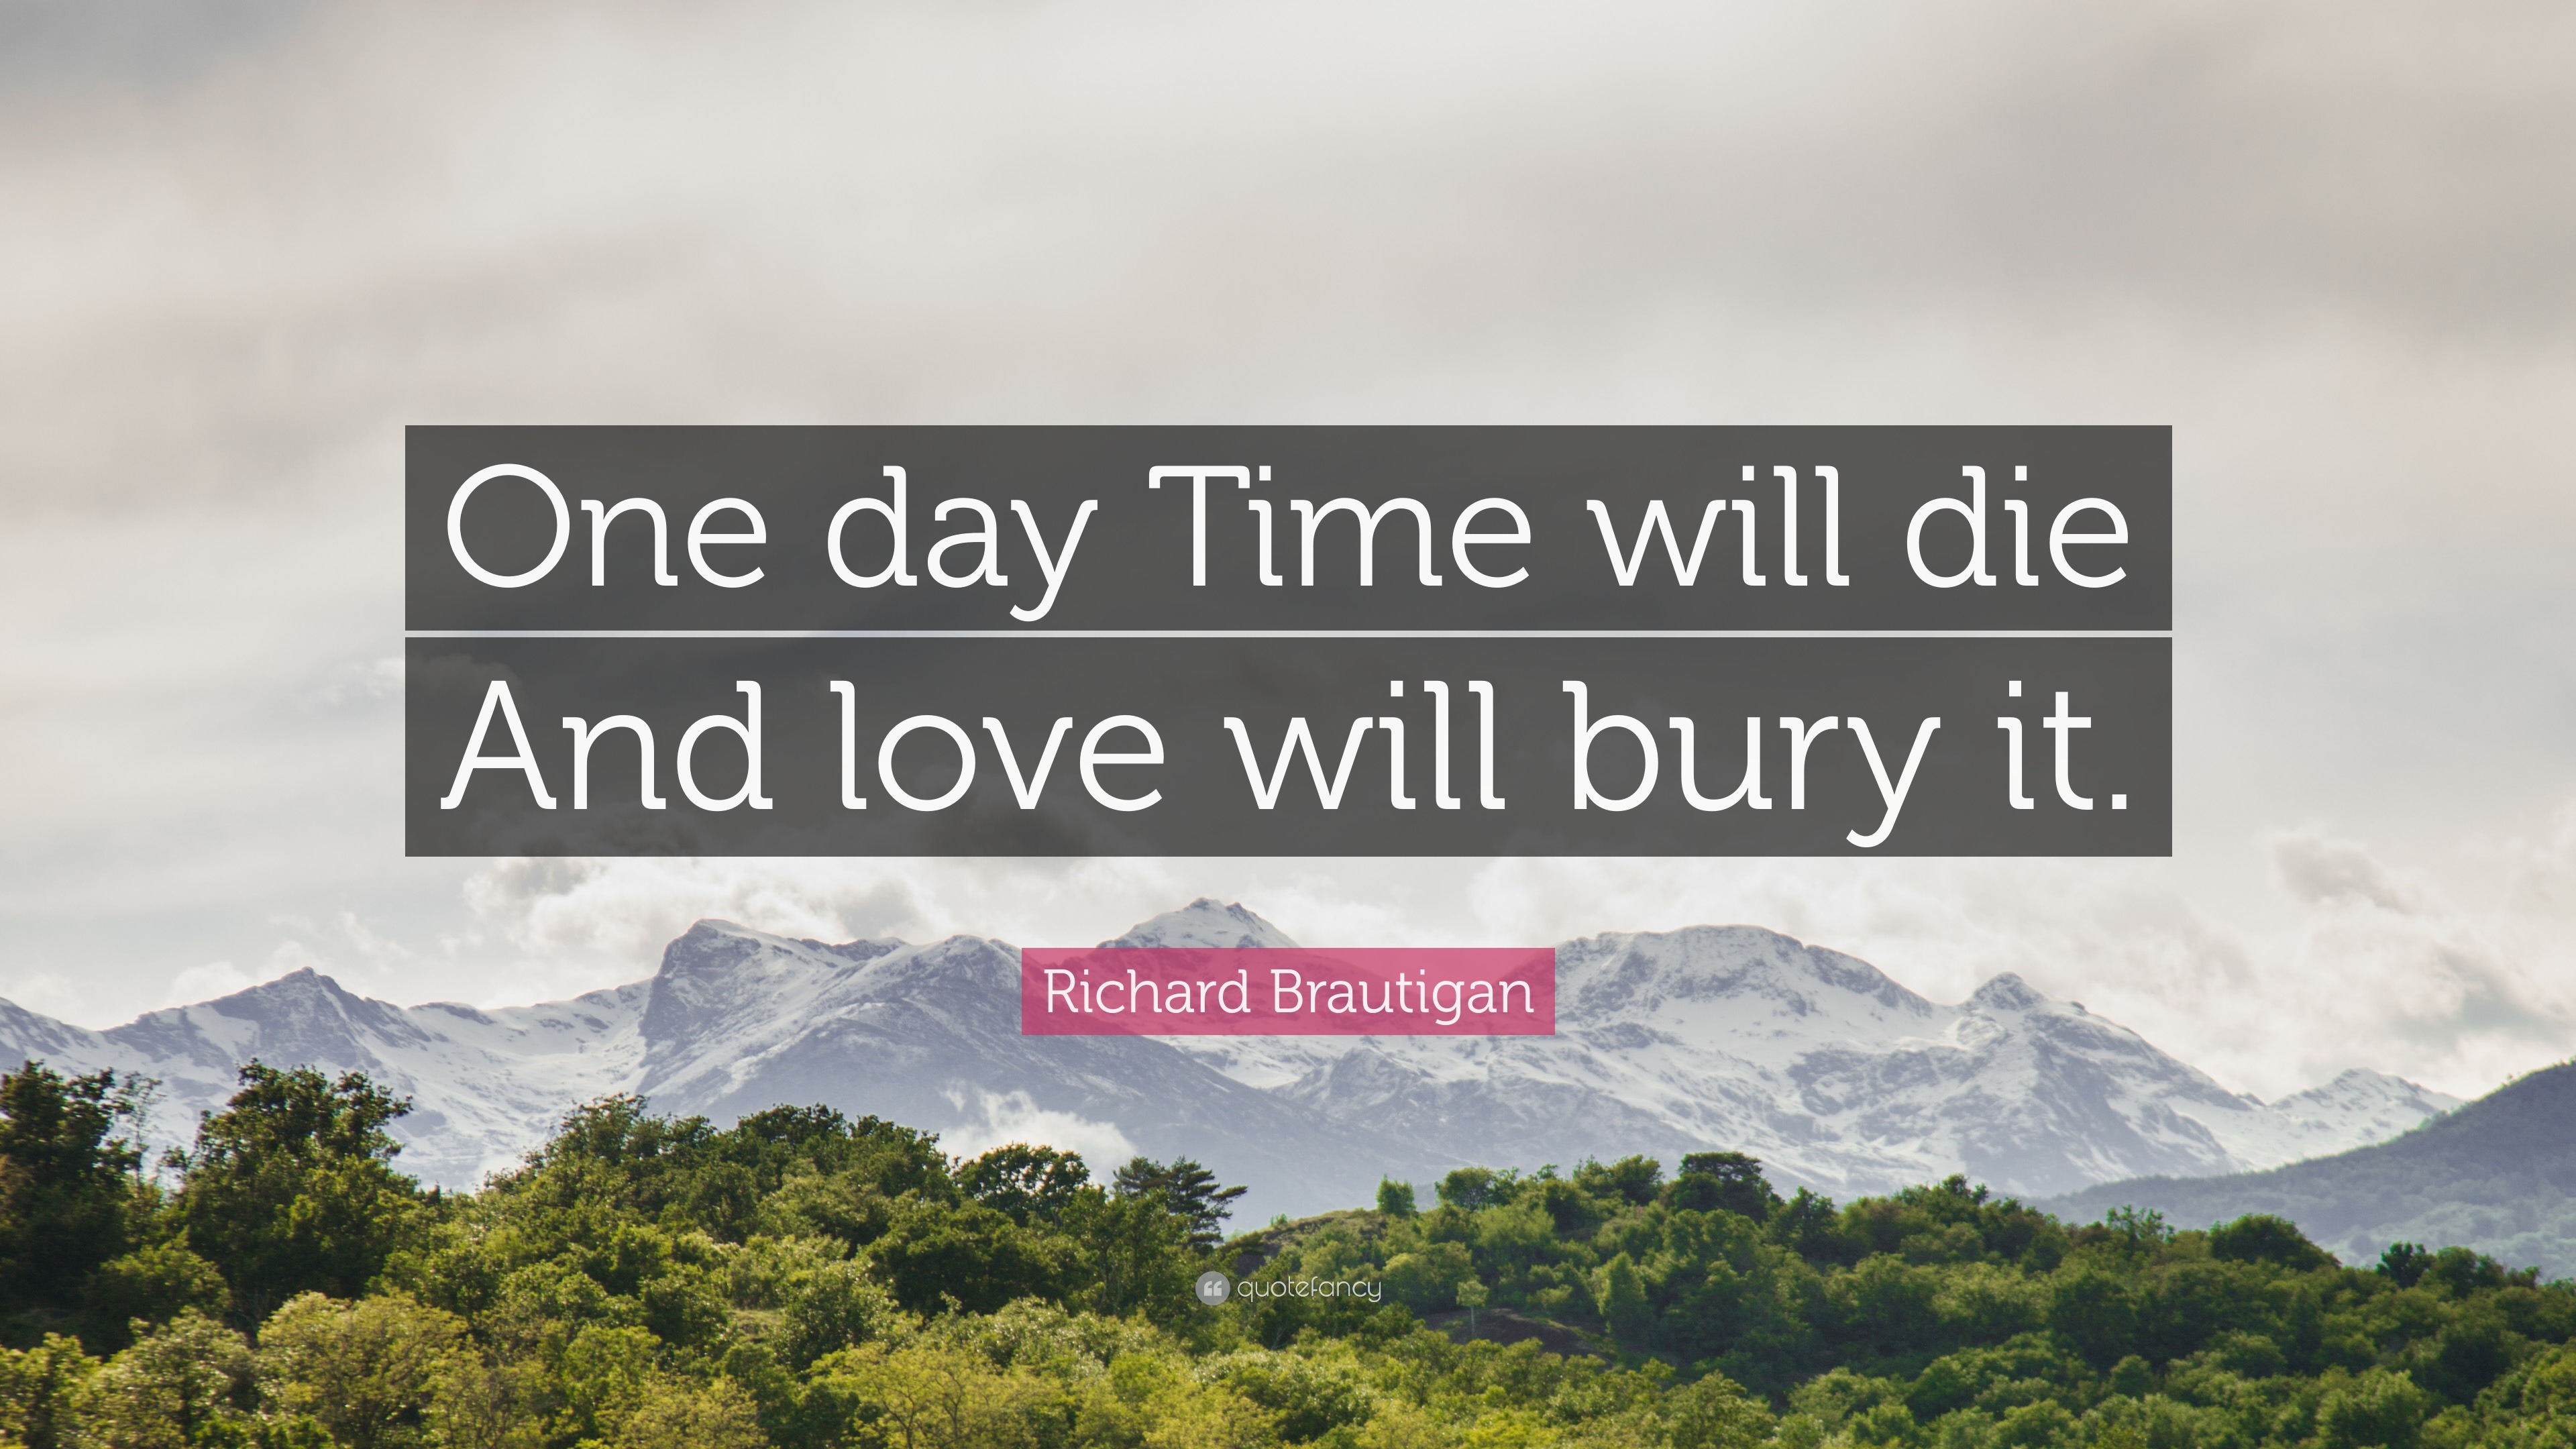 Richard Brautigan Quote “ e day Time will And love will bury it